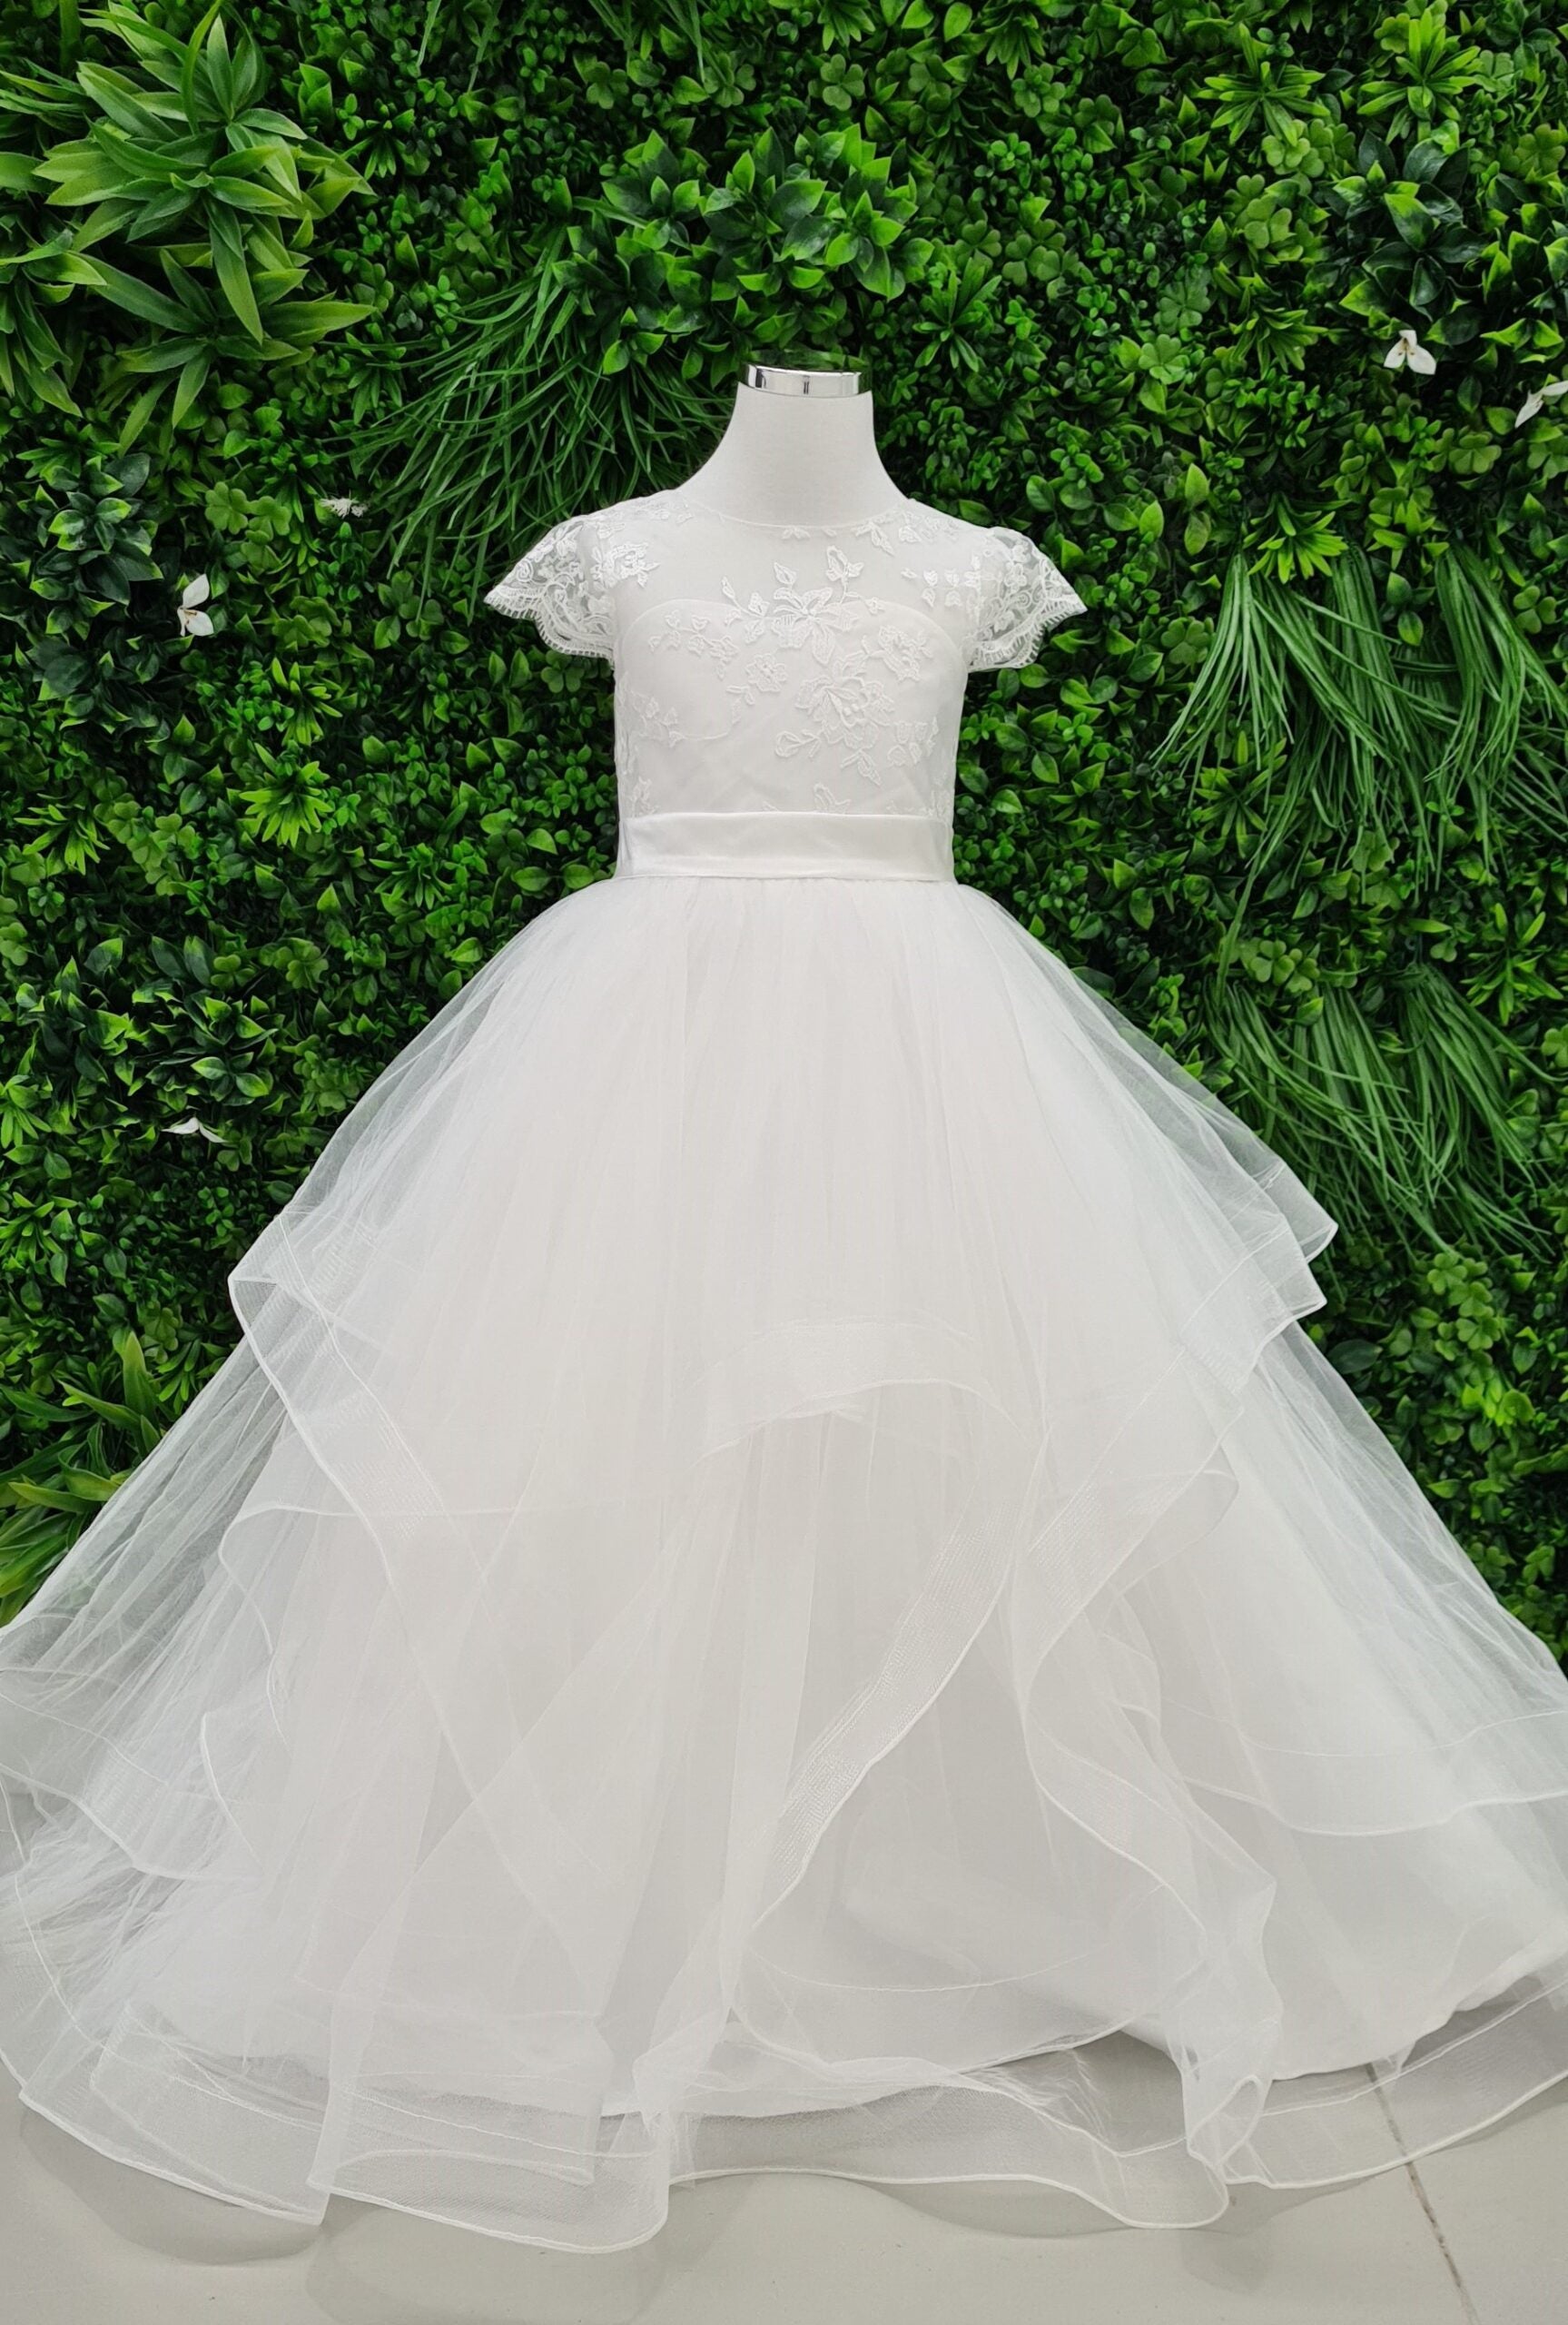 Made To Order - Luxury Handmade Flower Girl Dress with Horsehair Trim